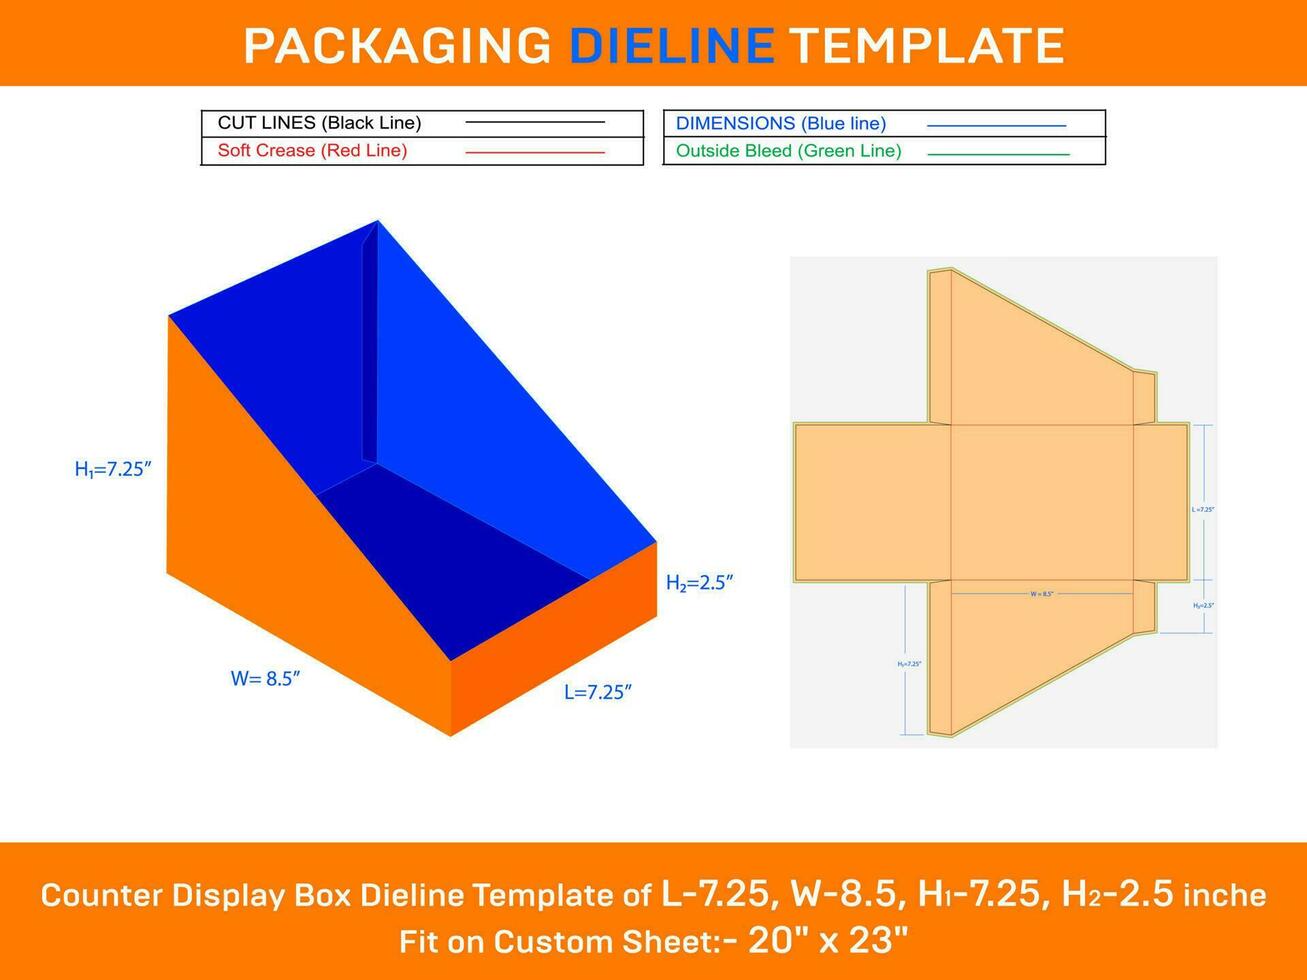 Small books counter display box dieline template for L 7.25x W 8.5 x H1 7.25 x H2 2.5 inche vector